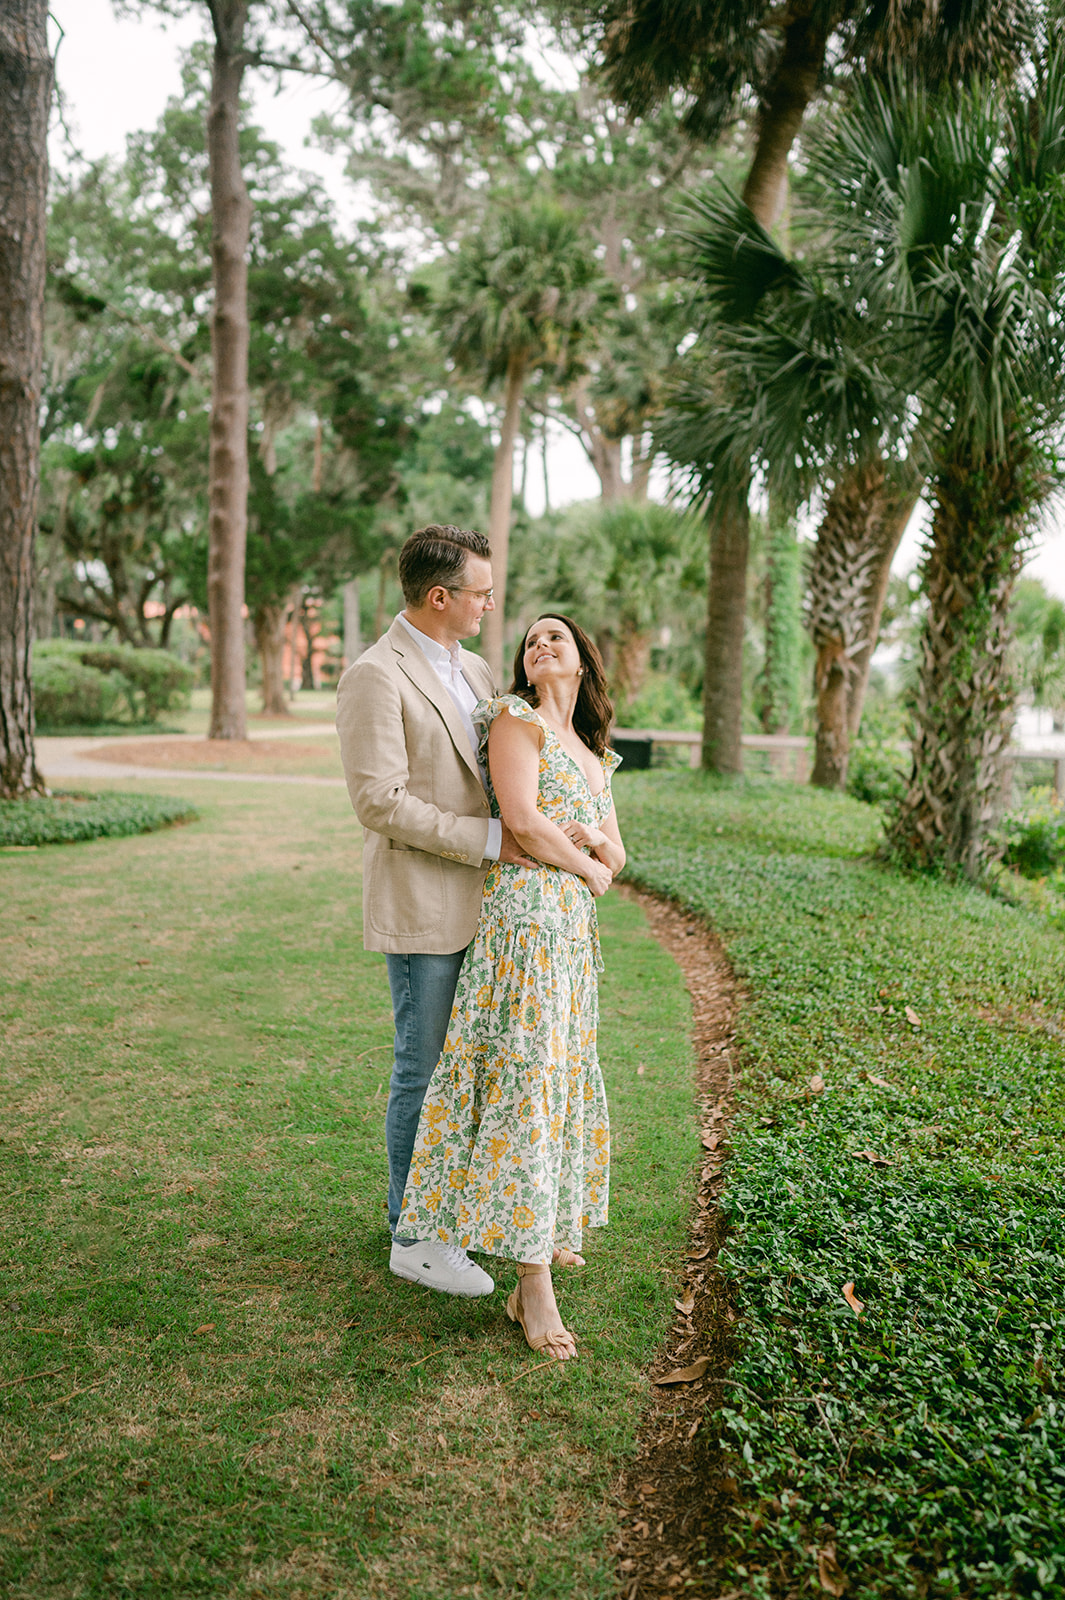 Couple hugging during their Palmetto Bluff photoshoot to celebrate their anniversary.